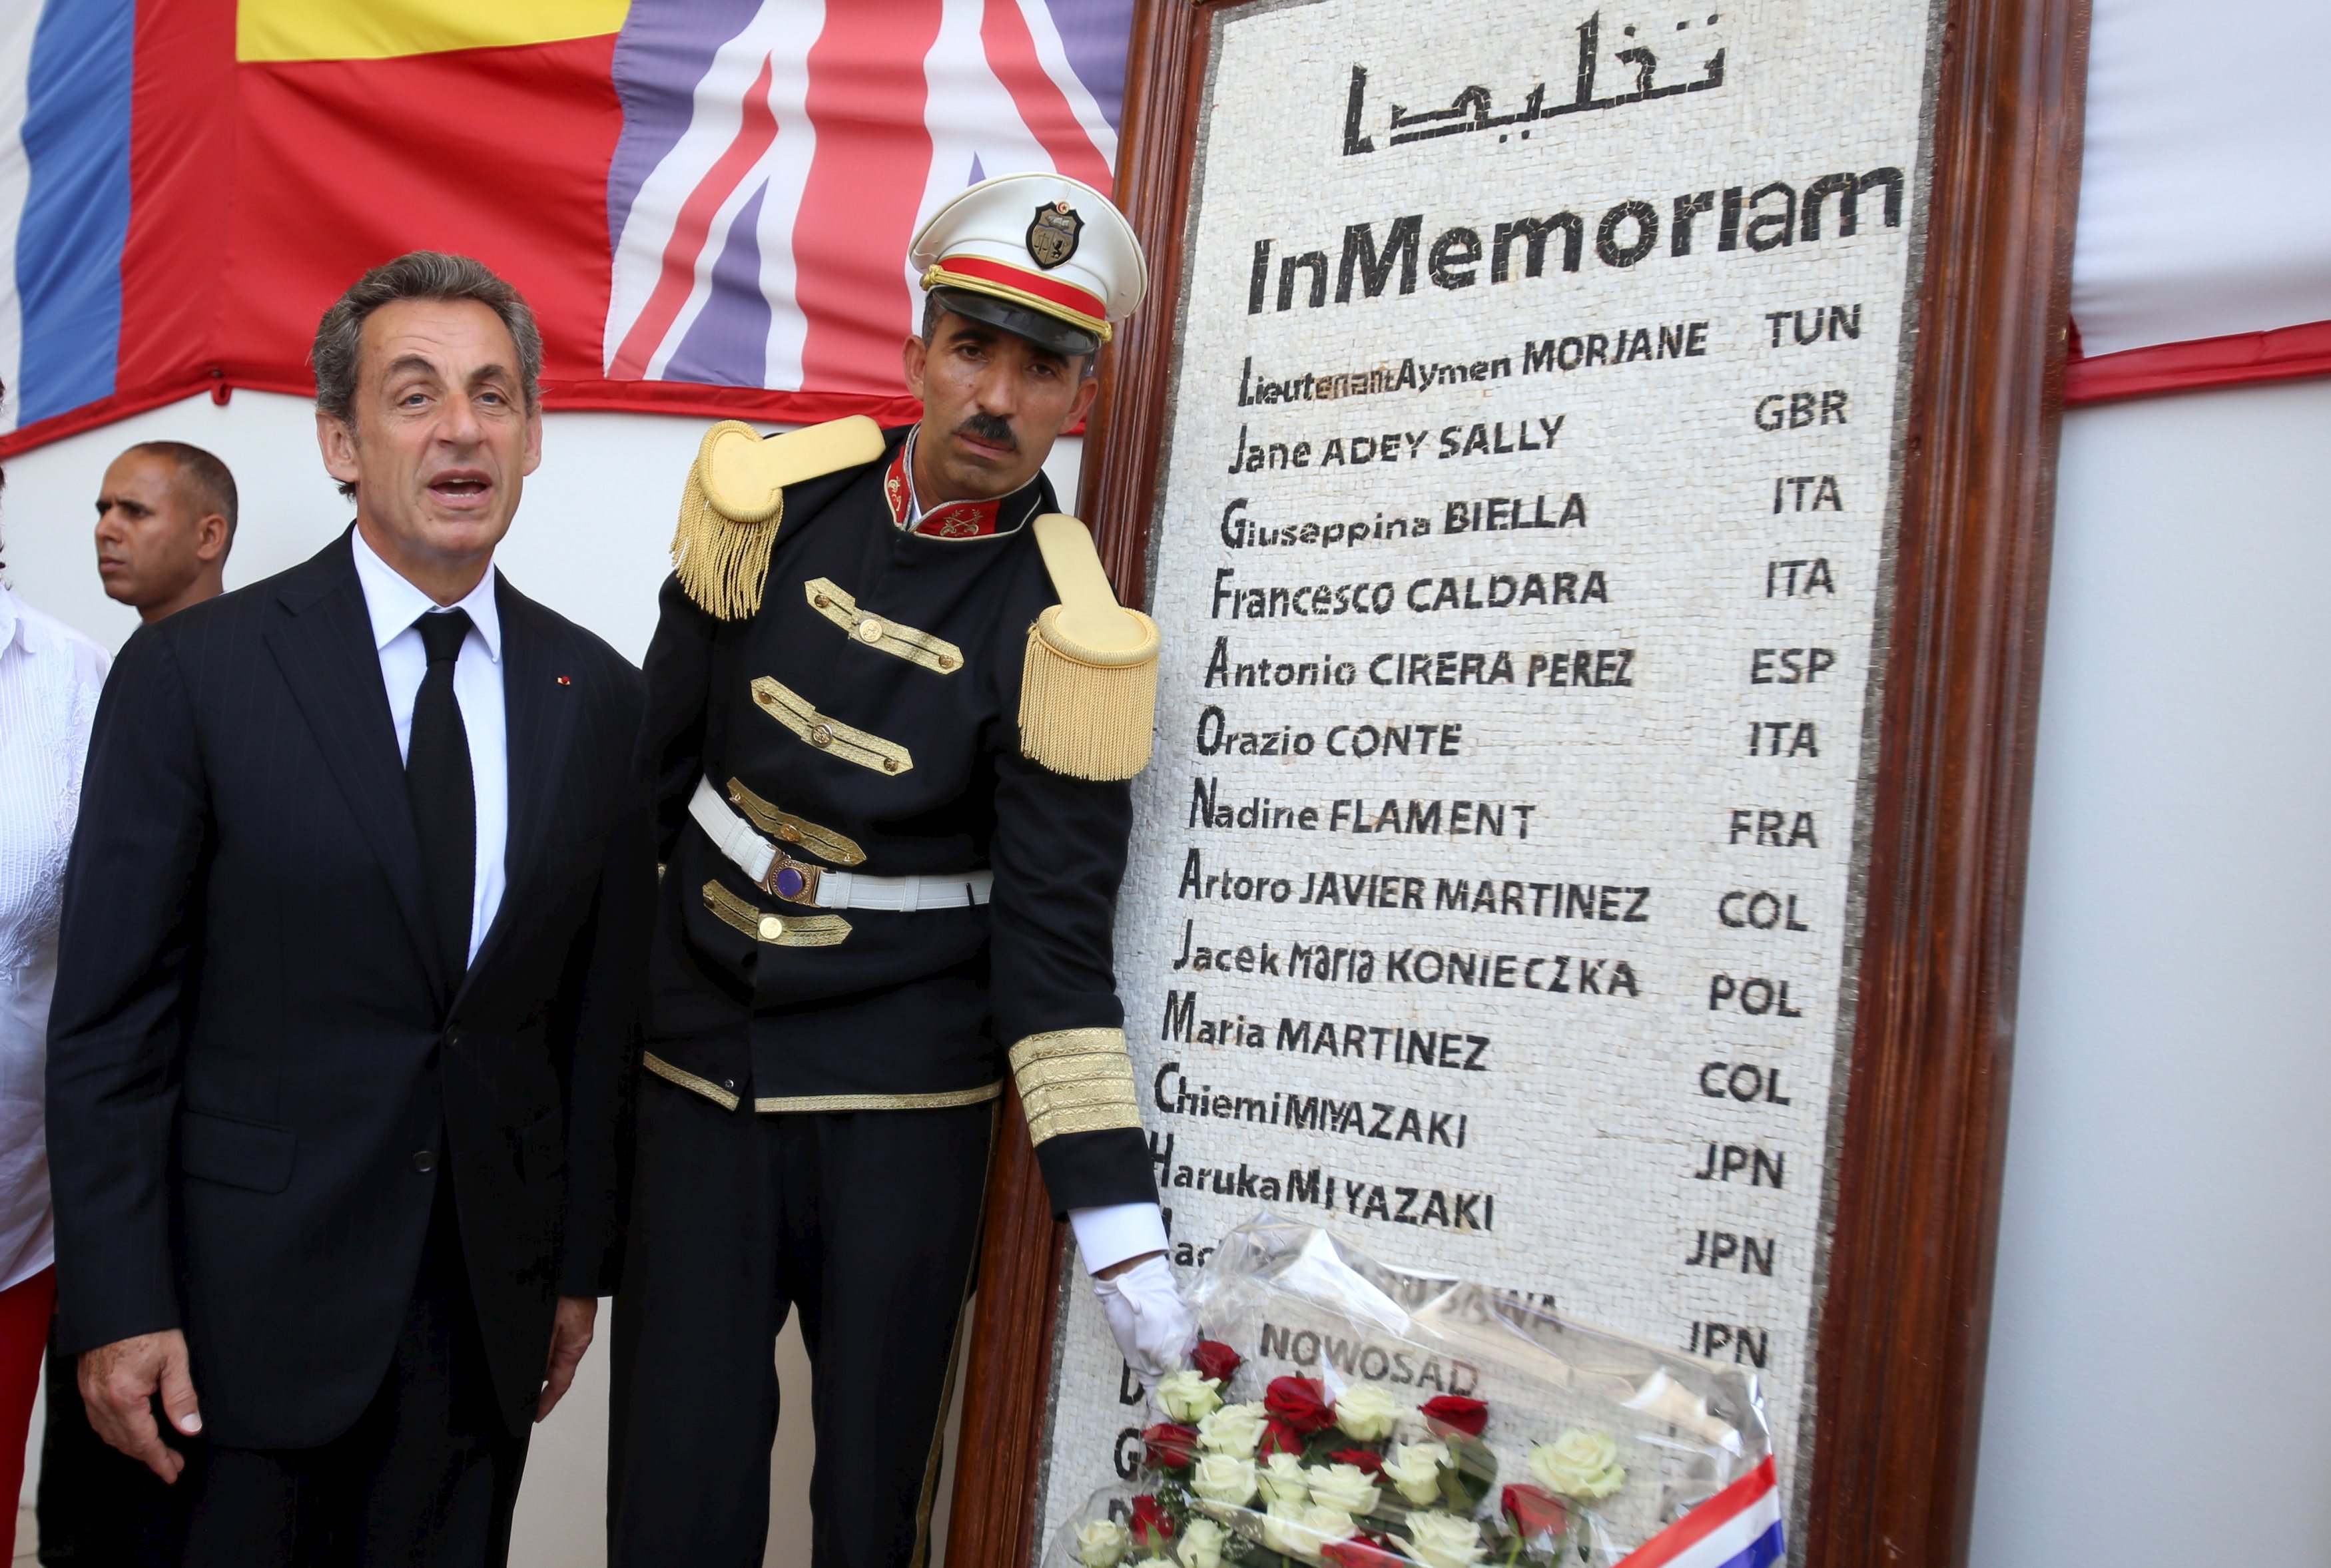 Former French President and head of the conservative Les Republicains party Nicolas Sarkozy (L) pays tribute to the victims of a militant attack on the Bardo Museum, in front of a memorial bearing their names, at the entrance of the museum in Tunis, Tunisia July 20, 2015. In March, two gunmen killed 21 people at the Tunis Bardo museum, before they were also shot.  REUTERS/Zoubeir Souissi